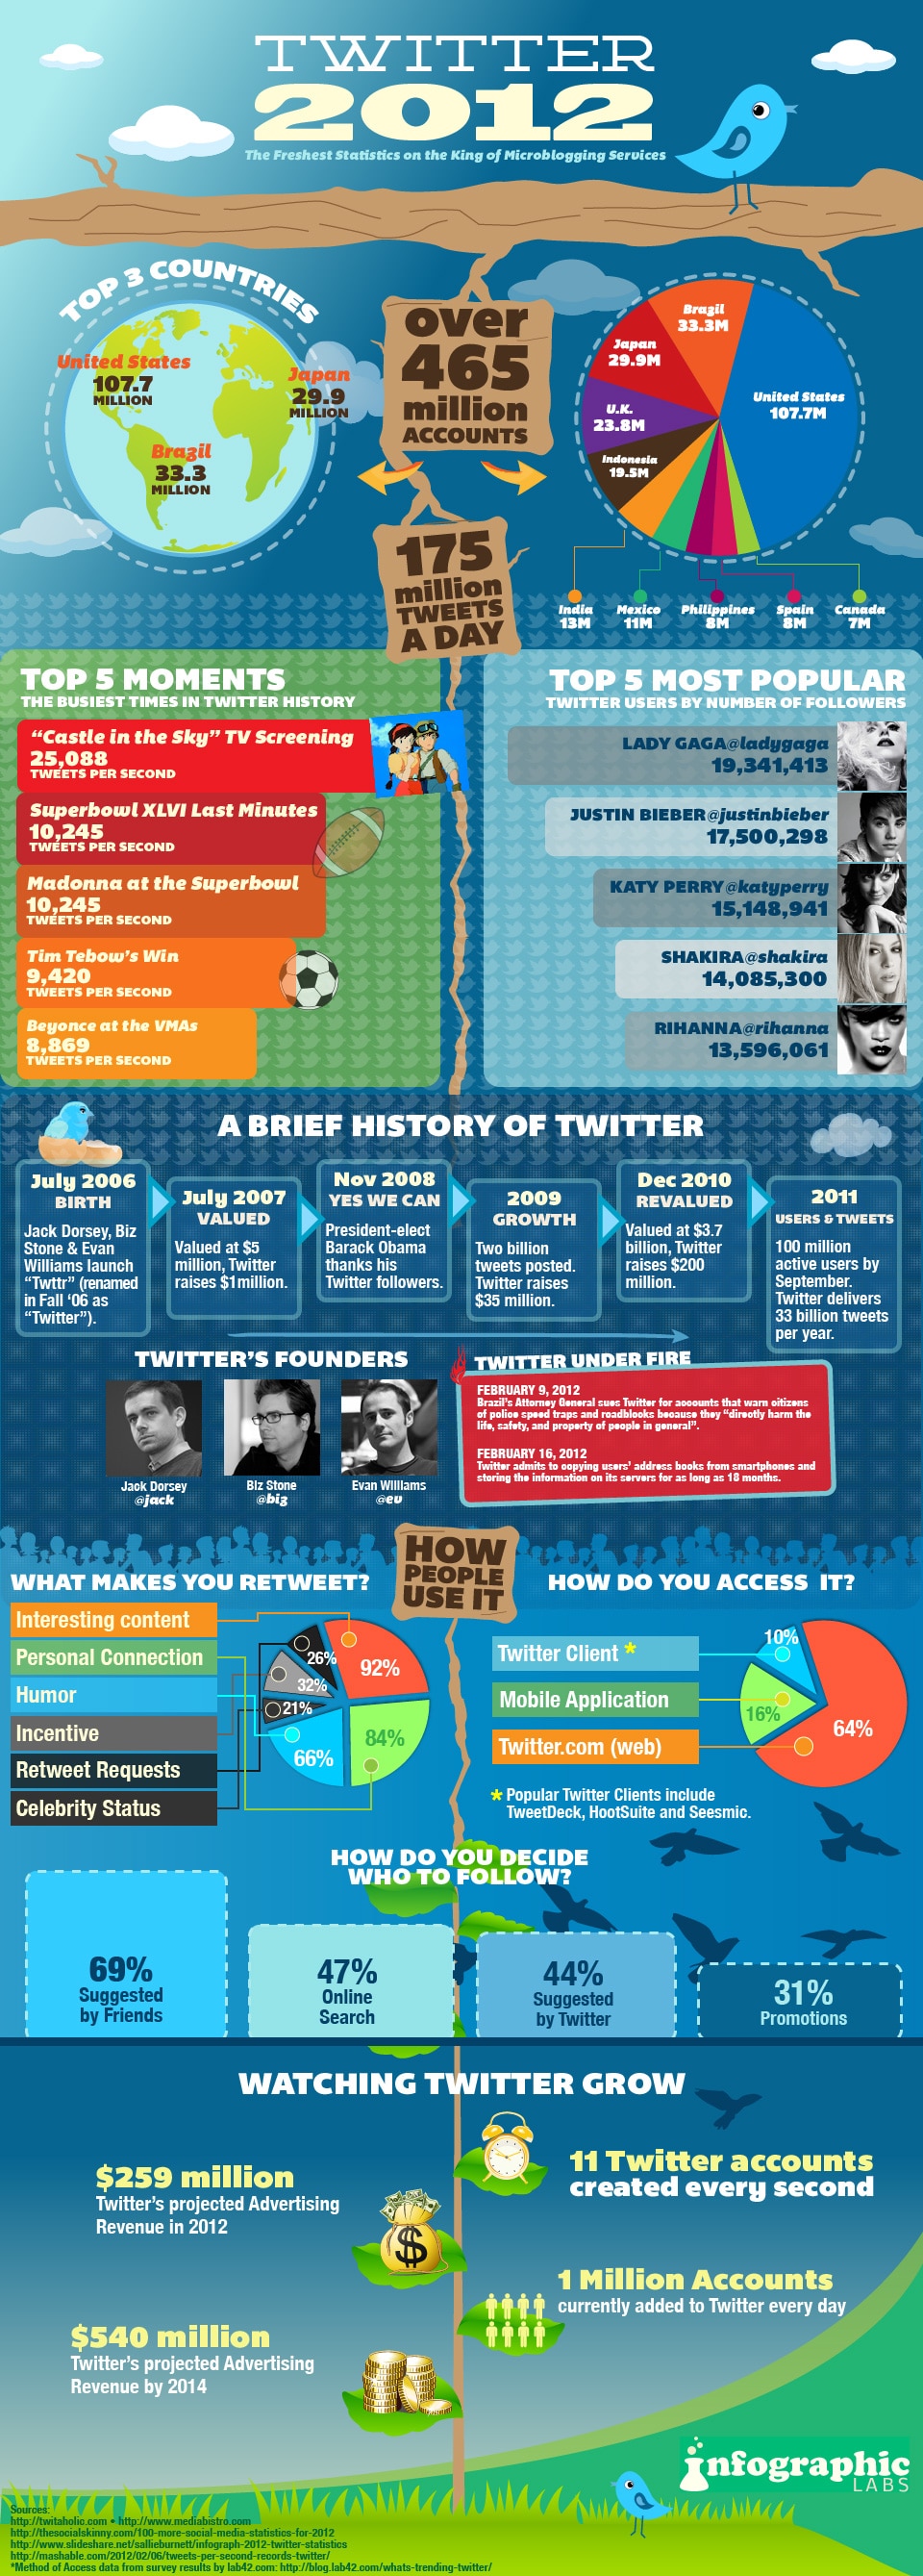 Twitter 2012: The Projected Stats & Facts [Infographic]